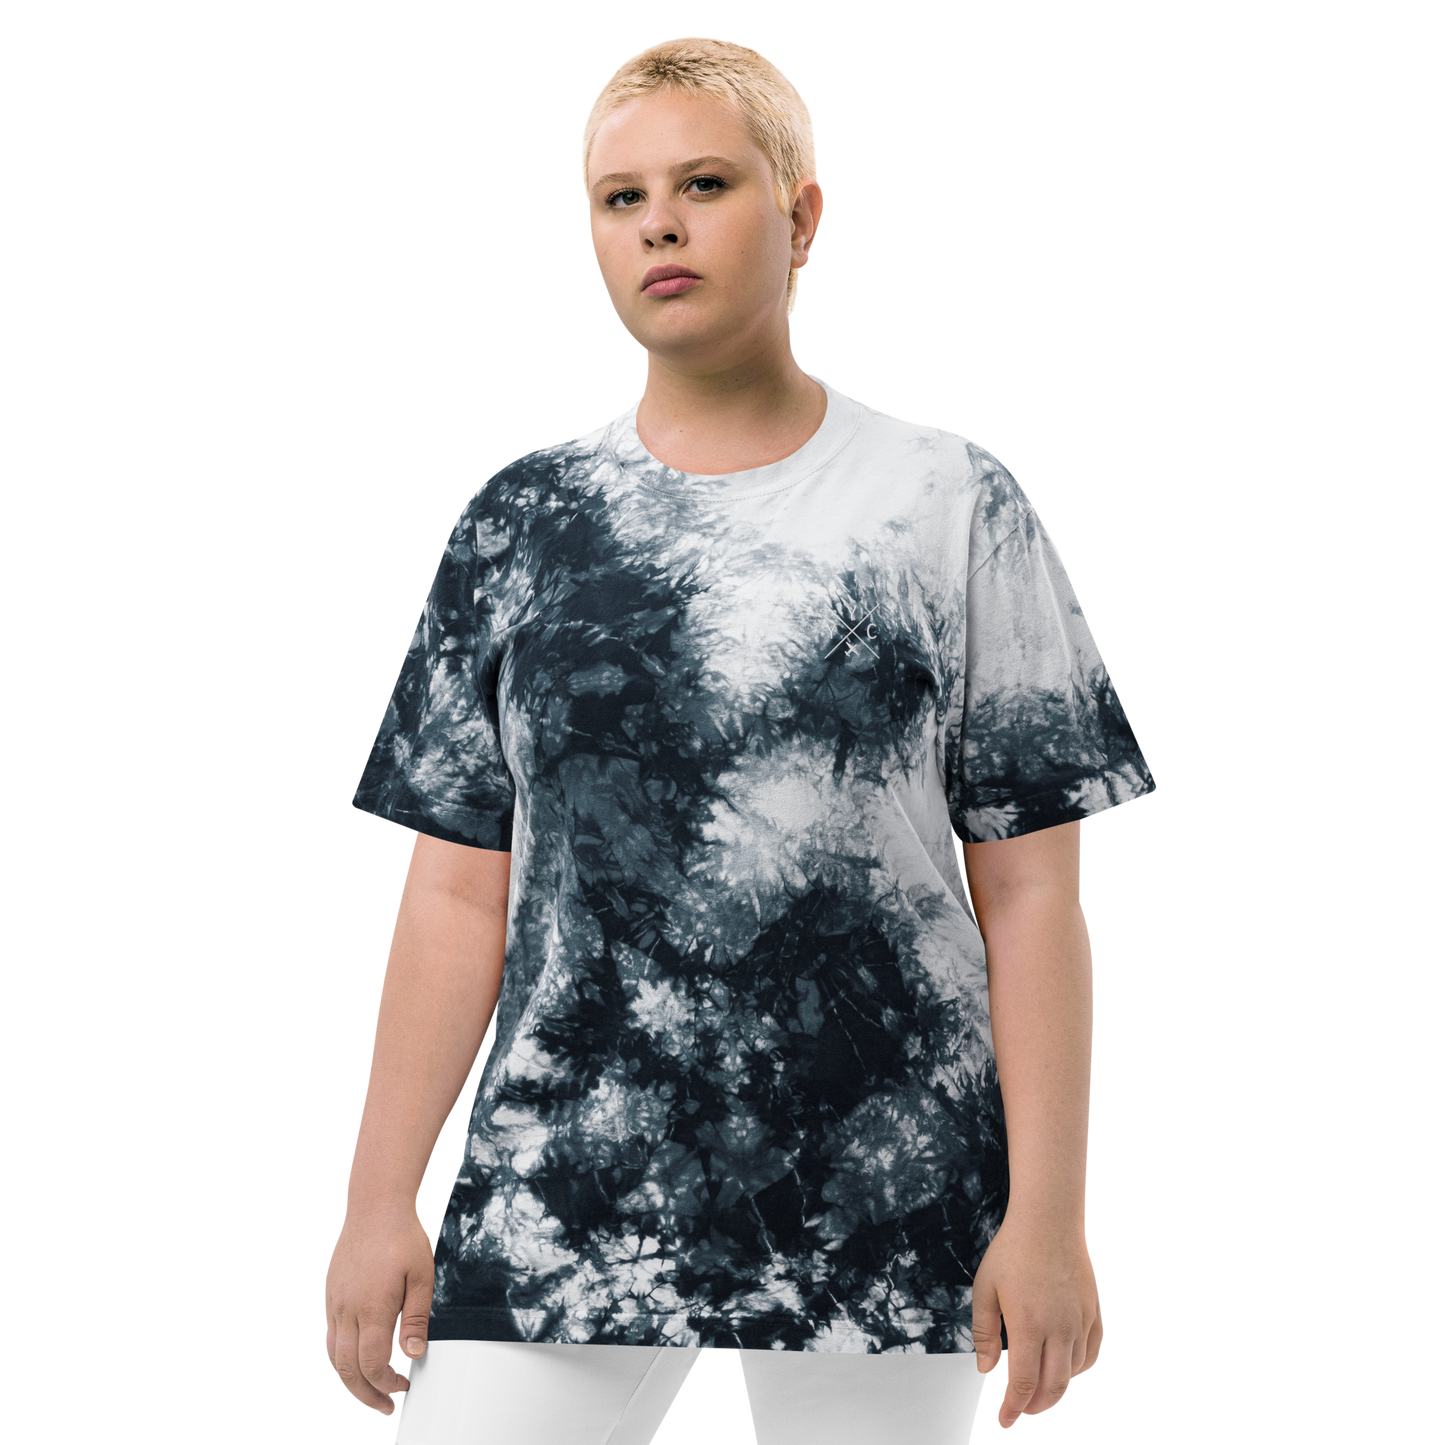 YHM Designs - YYC Calgary Oversized Tie-Dye T-Shirt - Crossed-X Design with Airport Code and Vintage Propliner - White Embroidery - Image 16